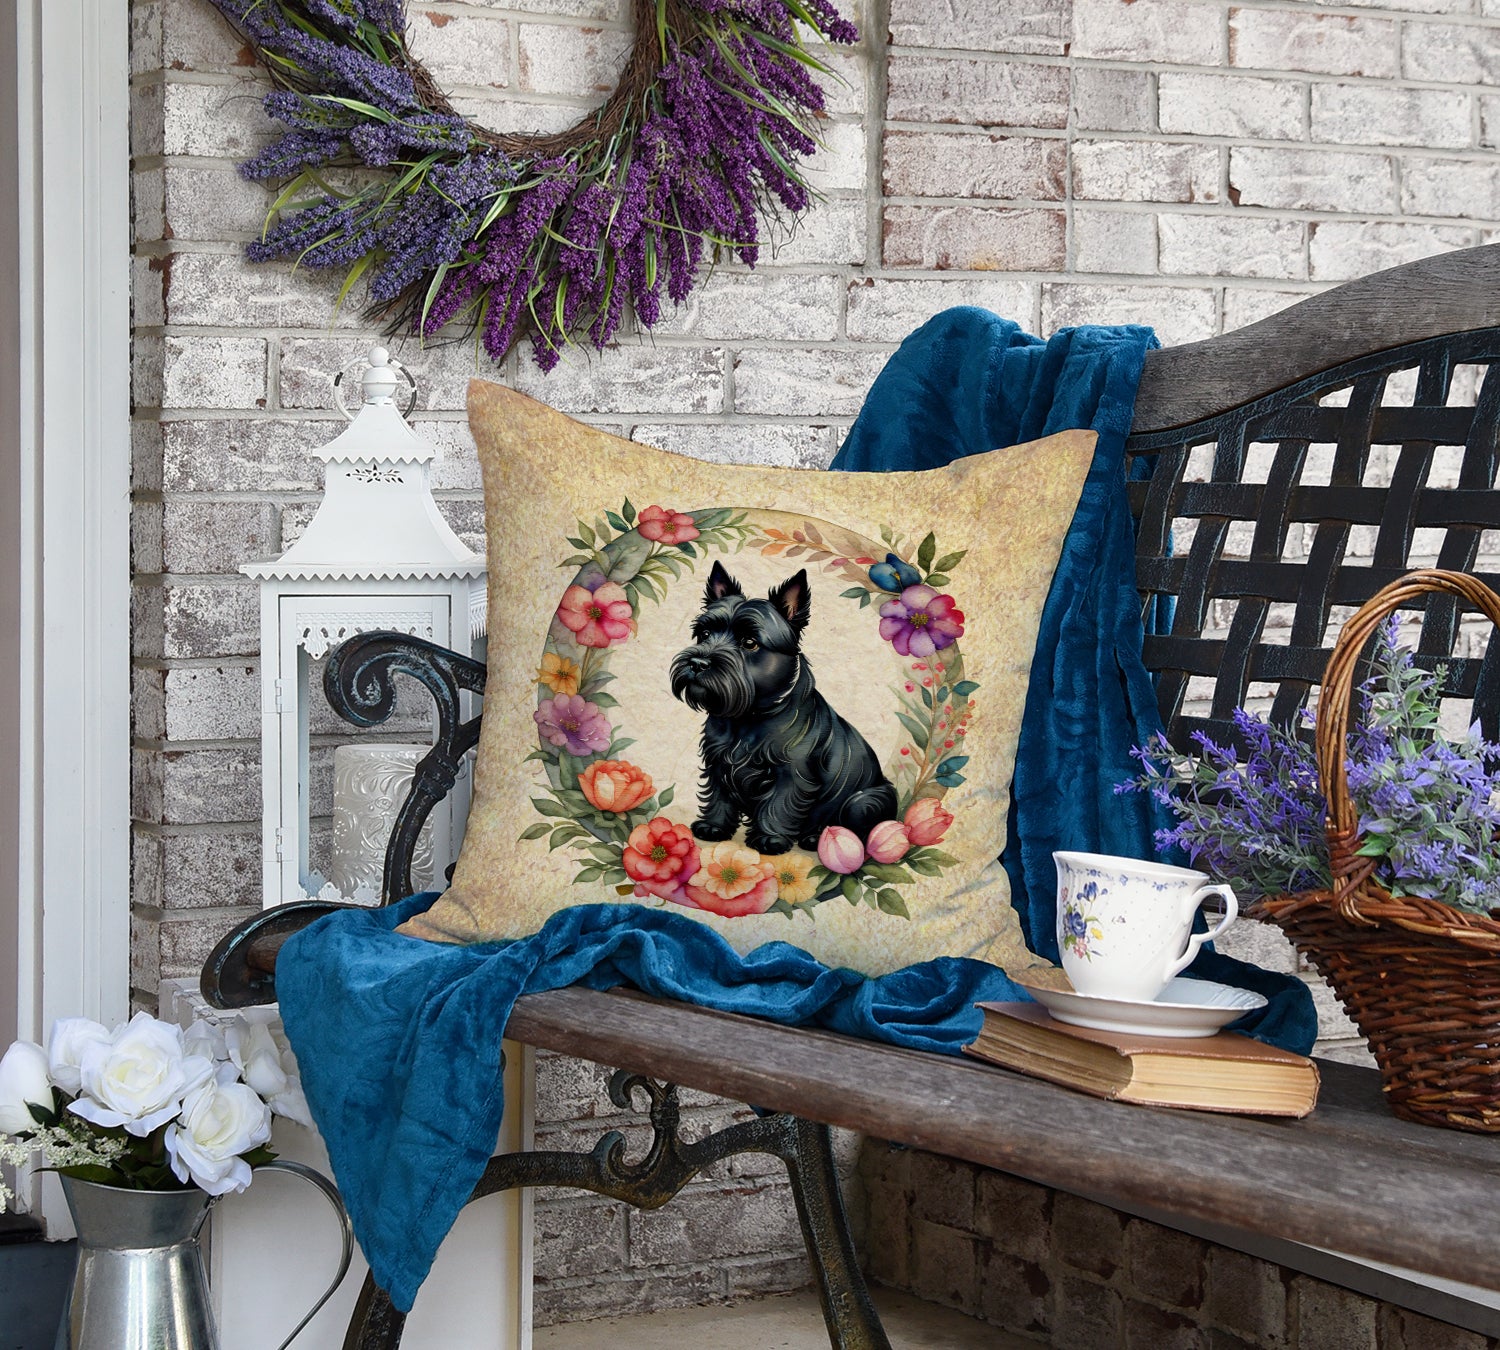 Scottish Terrier and Flowers Fabric Decorative Pillow